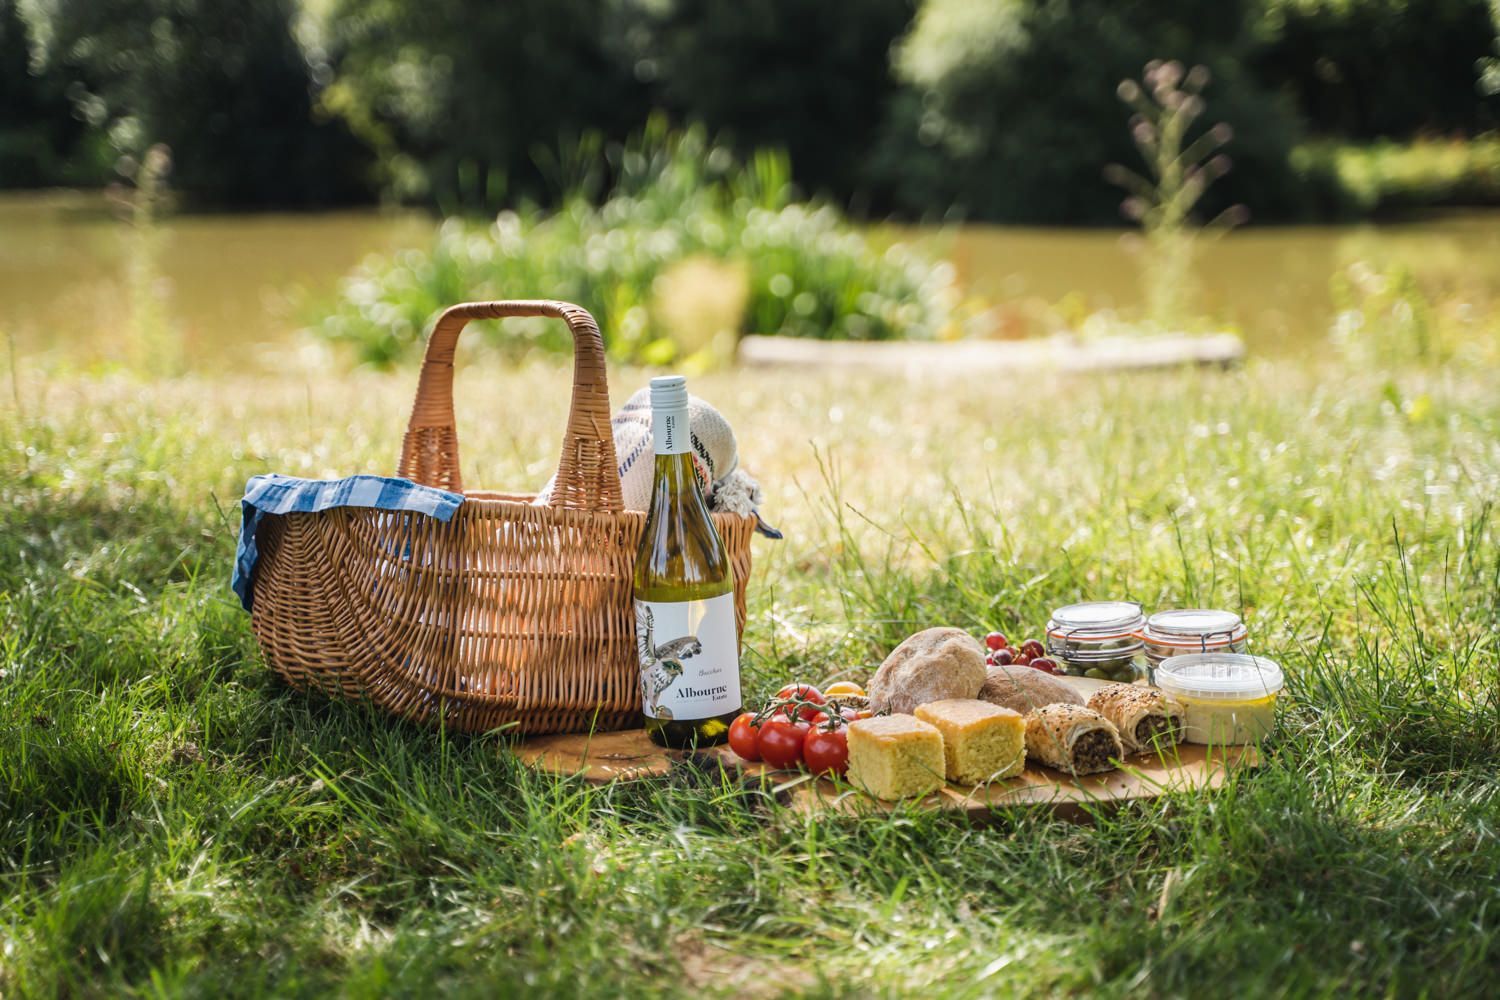 picnic basket and tray with snacks, fruits, vegetables. spread and bottle of white wine